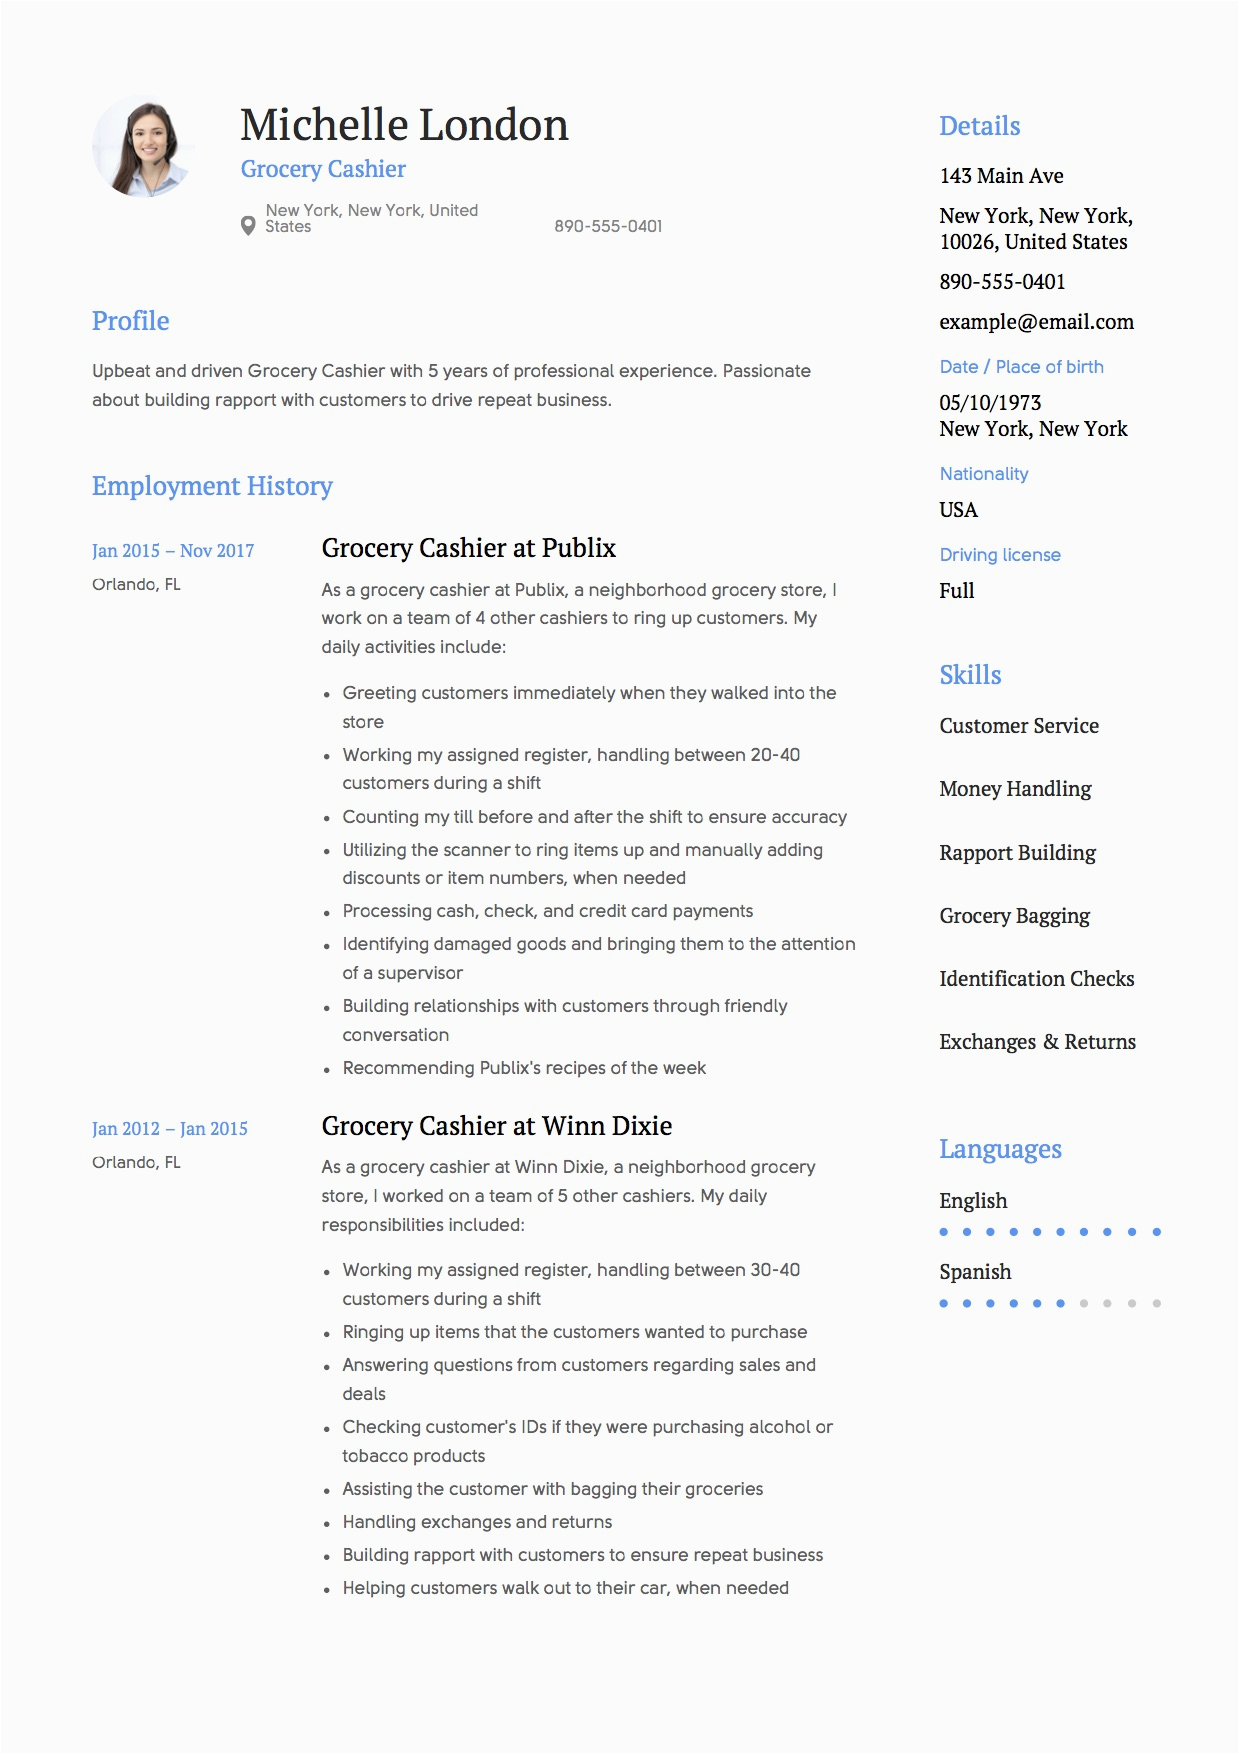 Sample Resume for Grocery Store Cashier 12 Grocery Cashier Resume Sample S 2018 Free Downloads